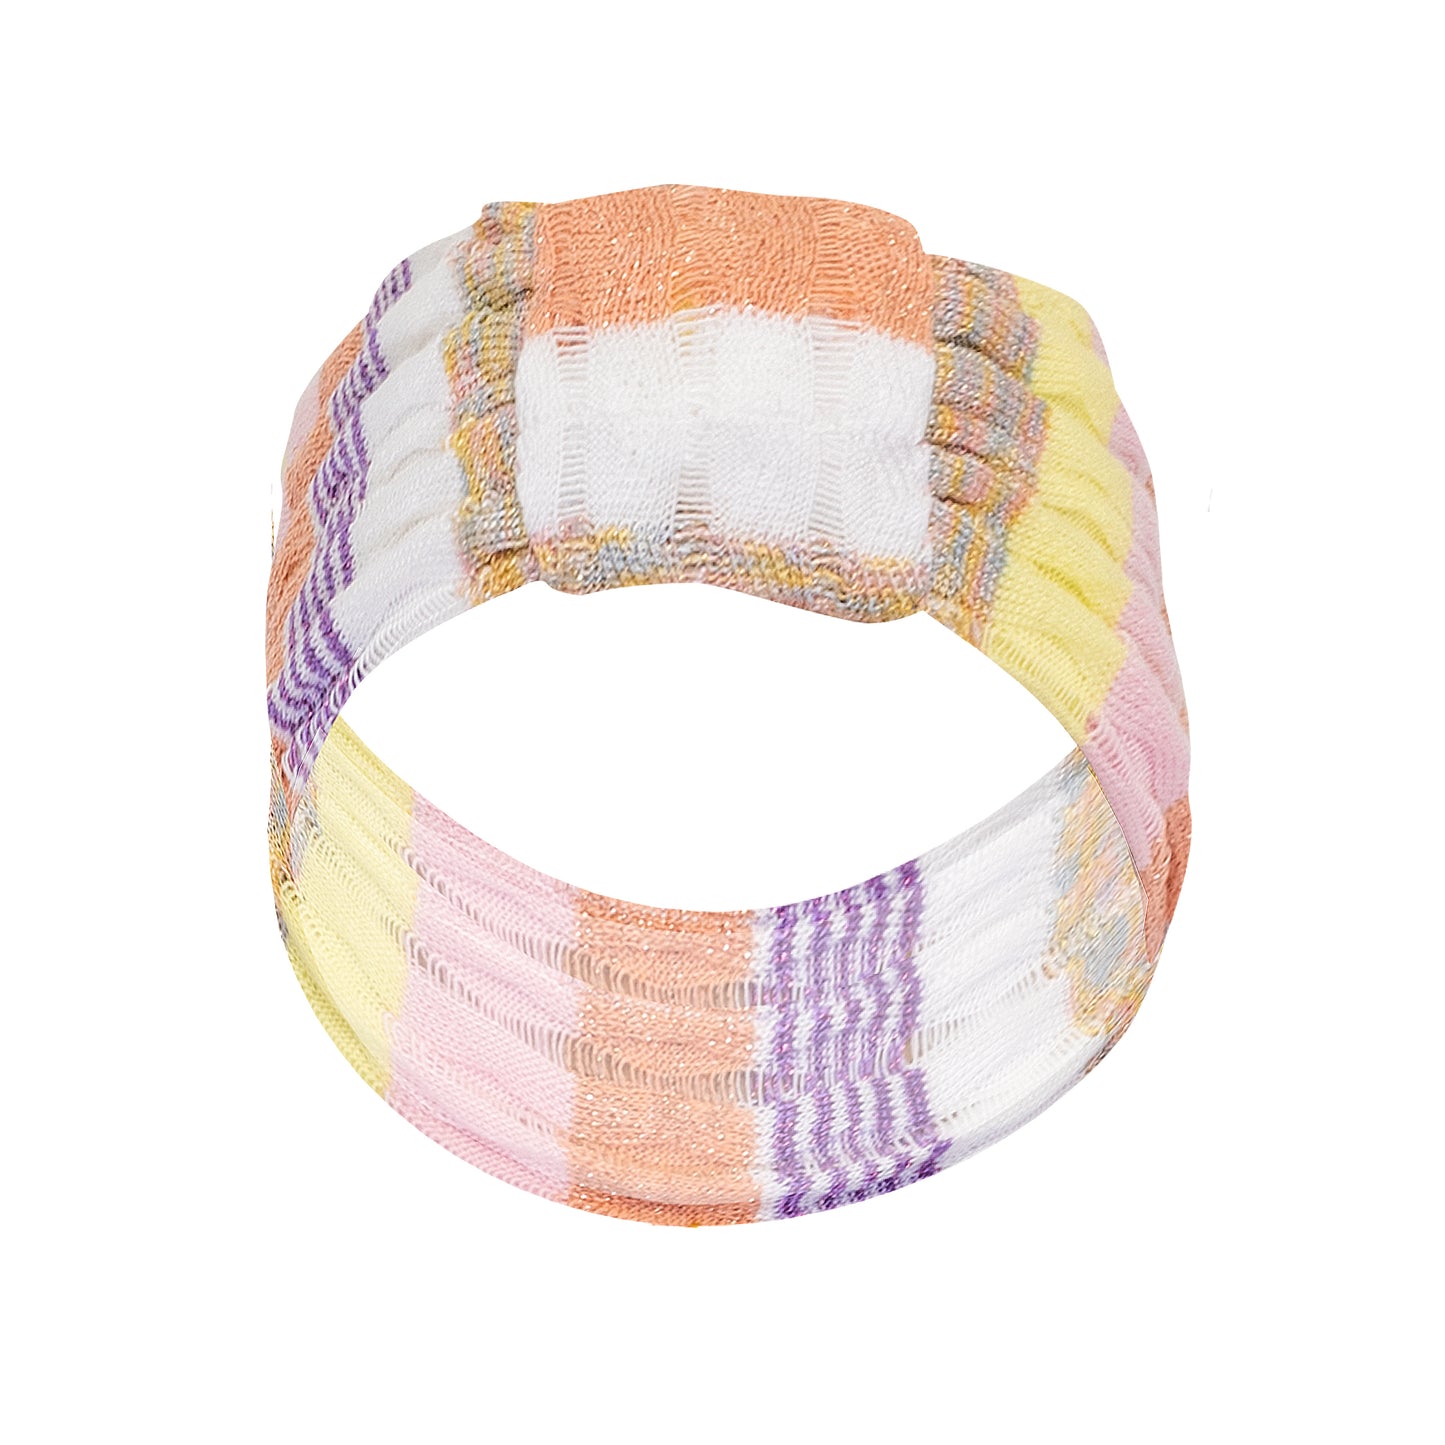 Headband In Striped Racking Knit White/Pink/Peach